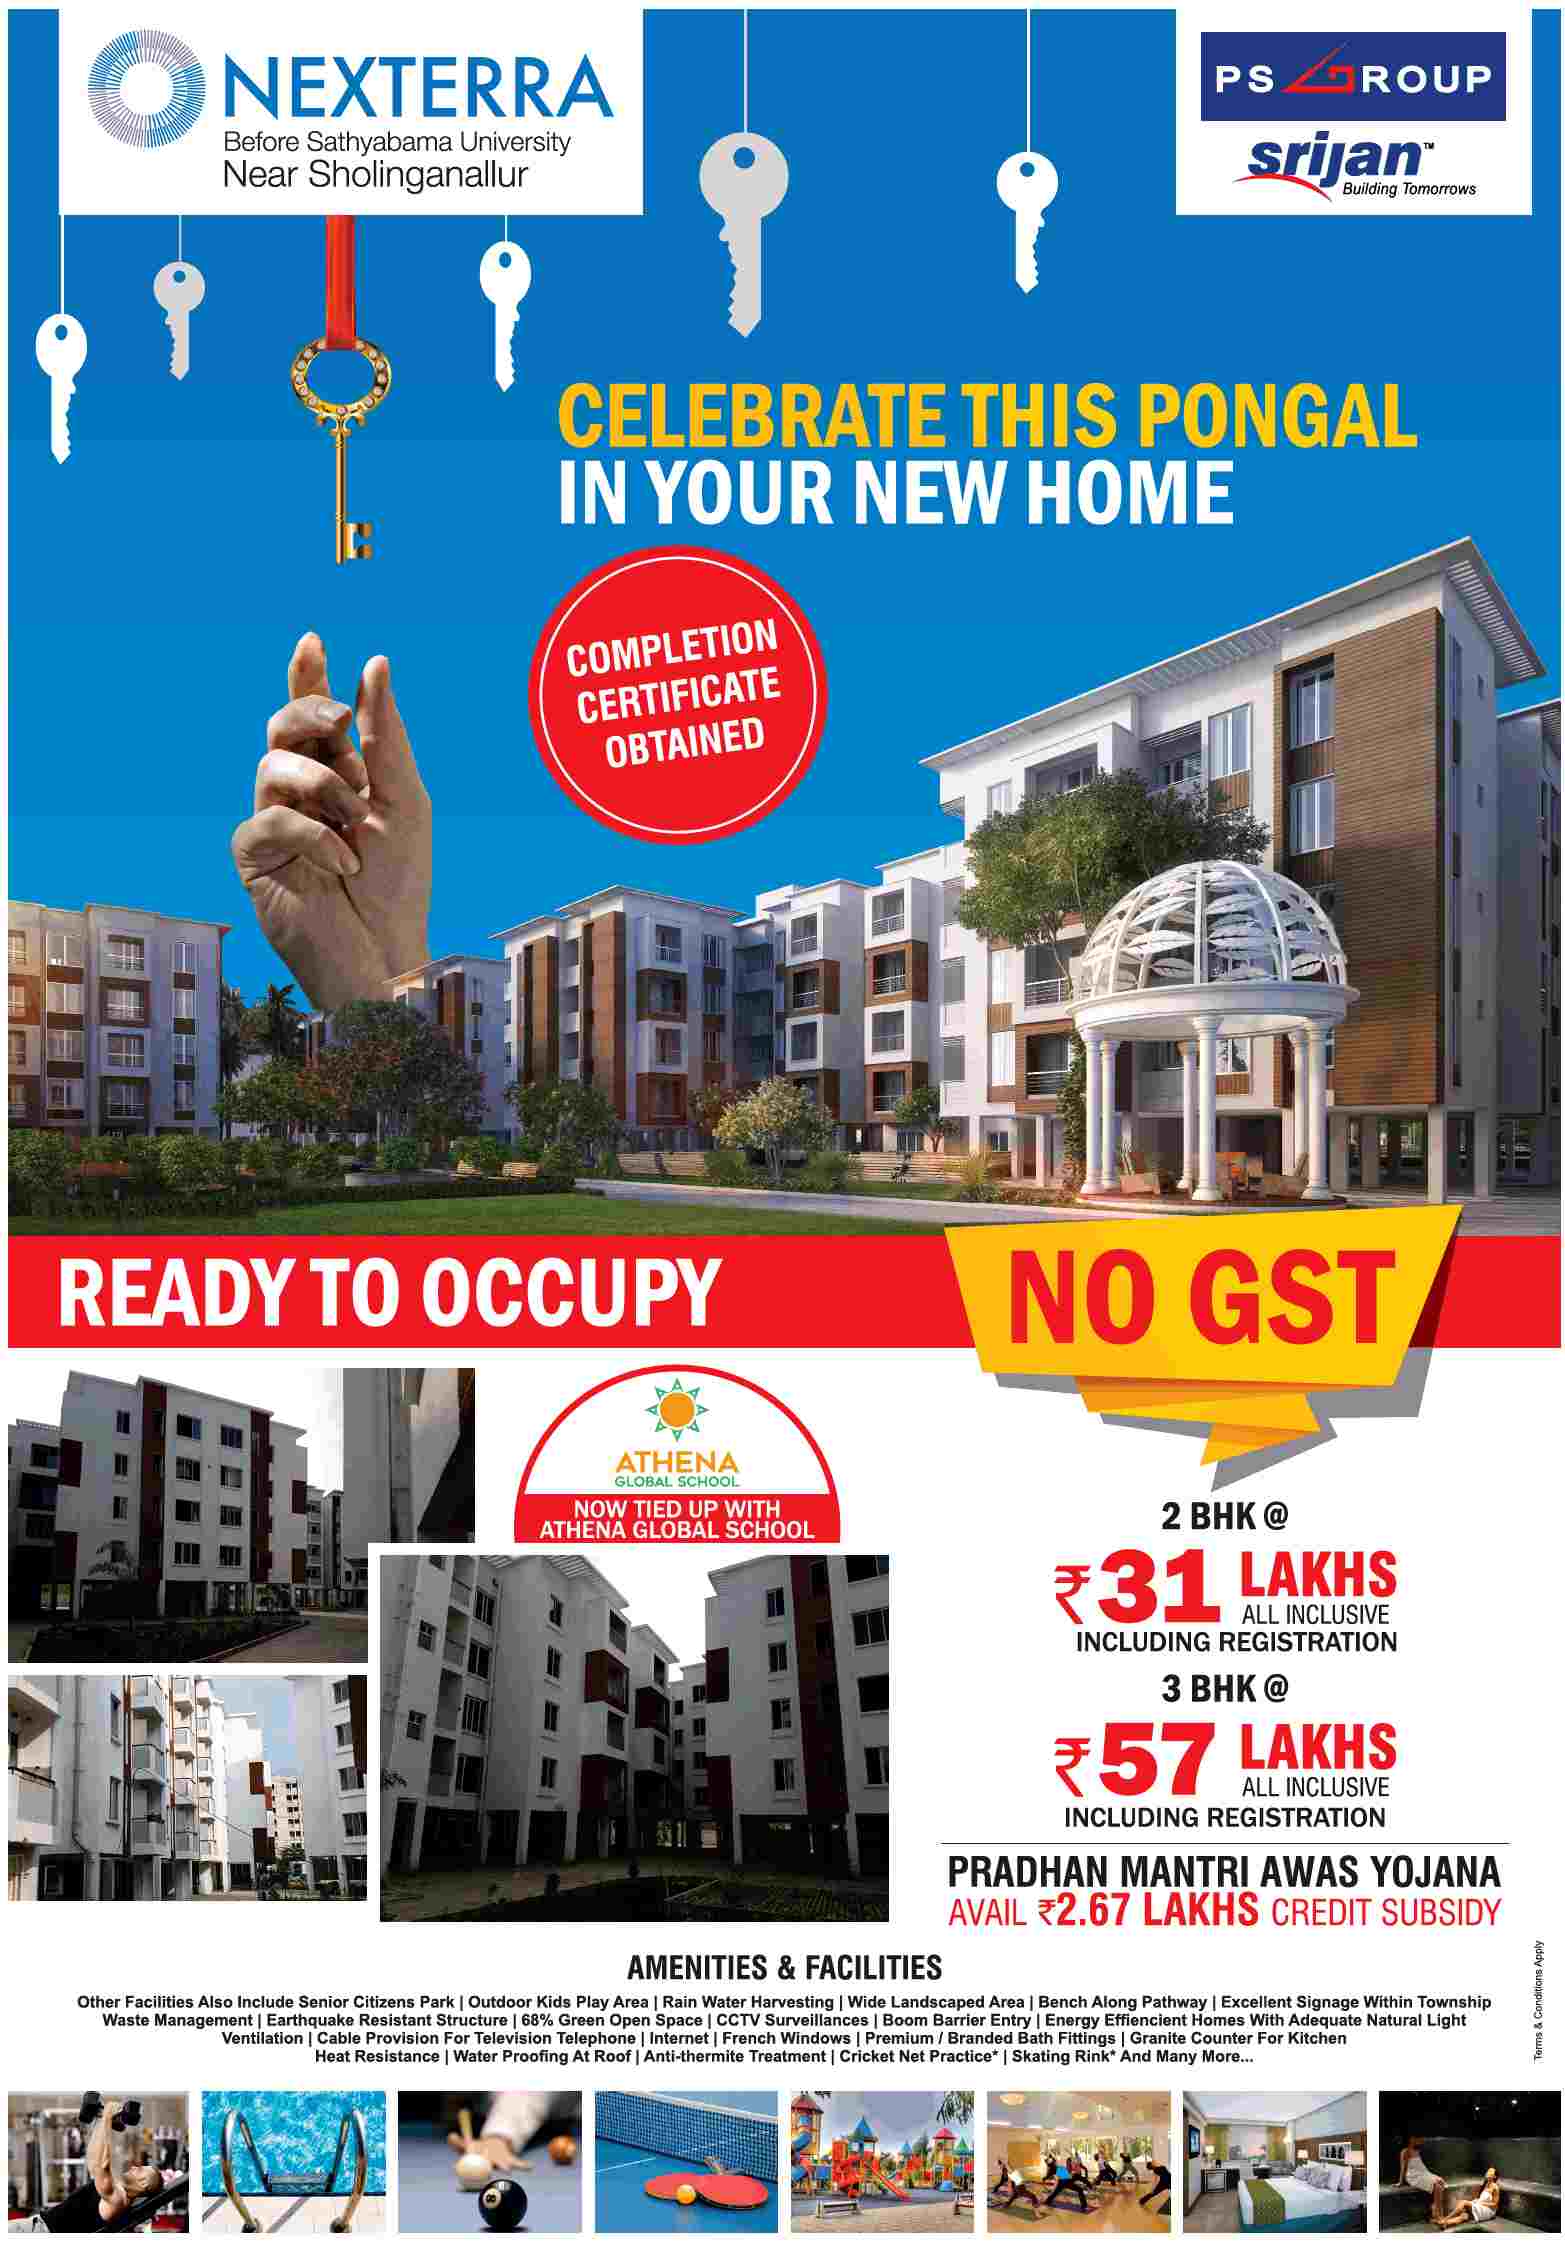 Celebrate this Pongal in your new home at PS Srijan Nexterra in Chennai